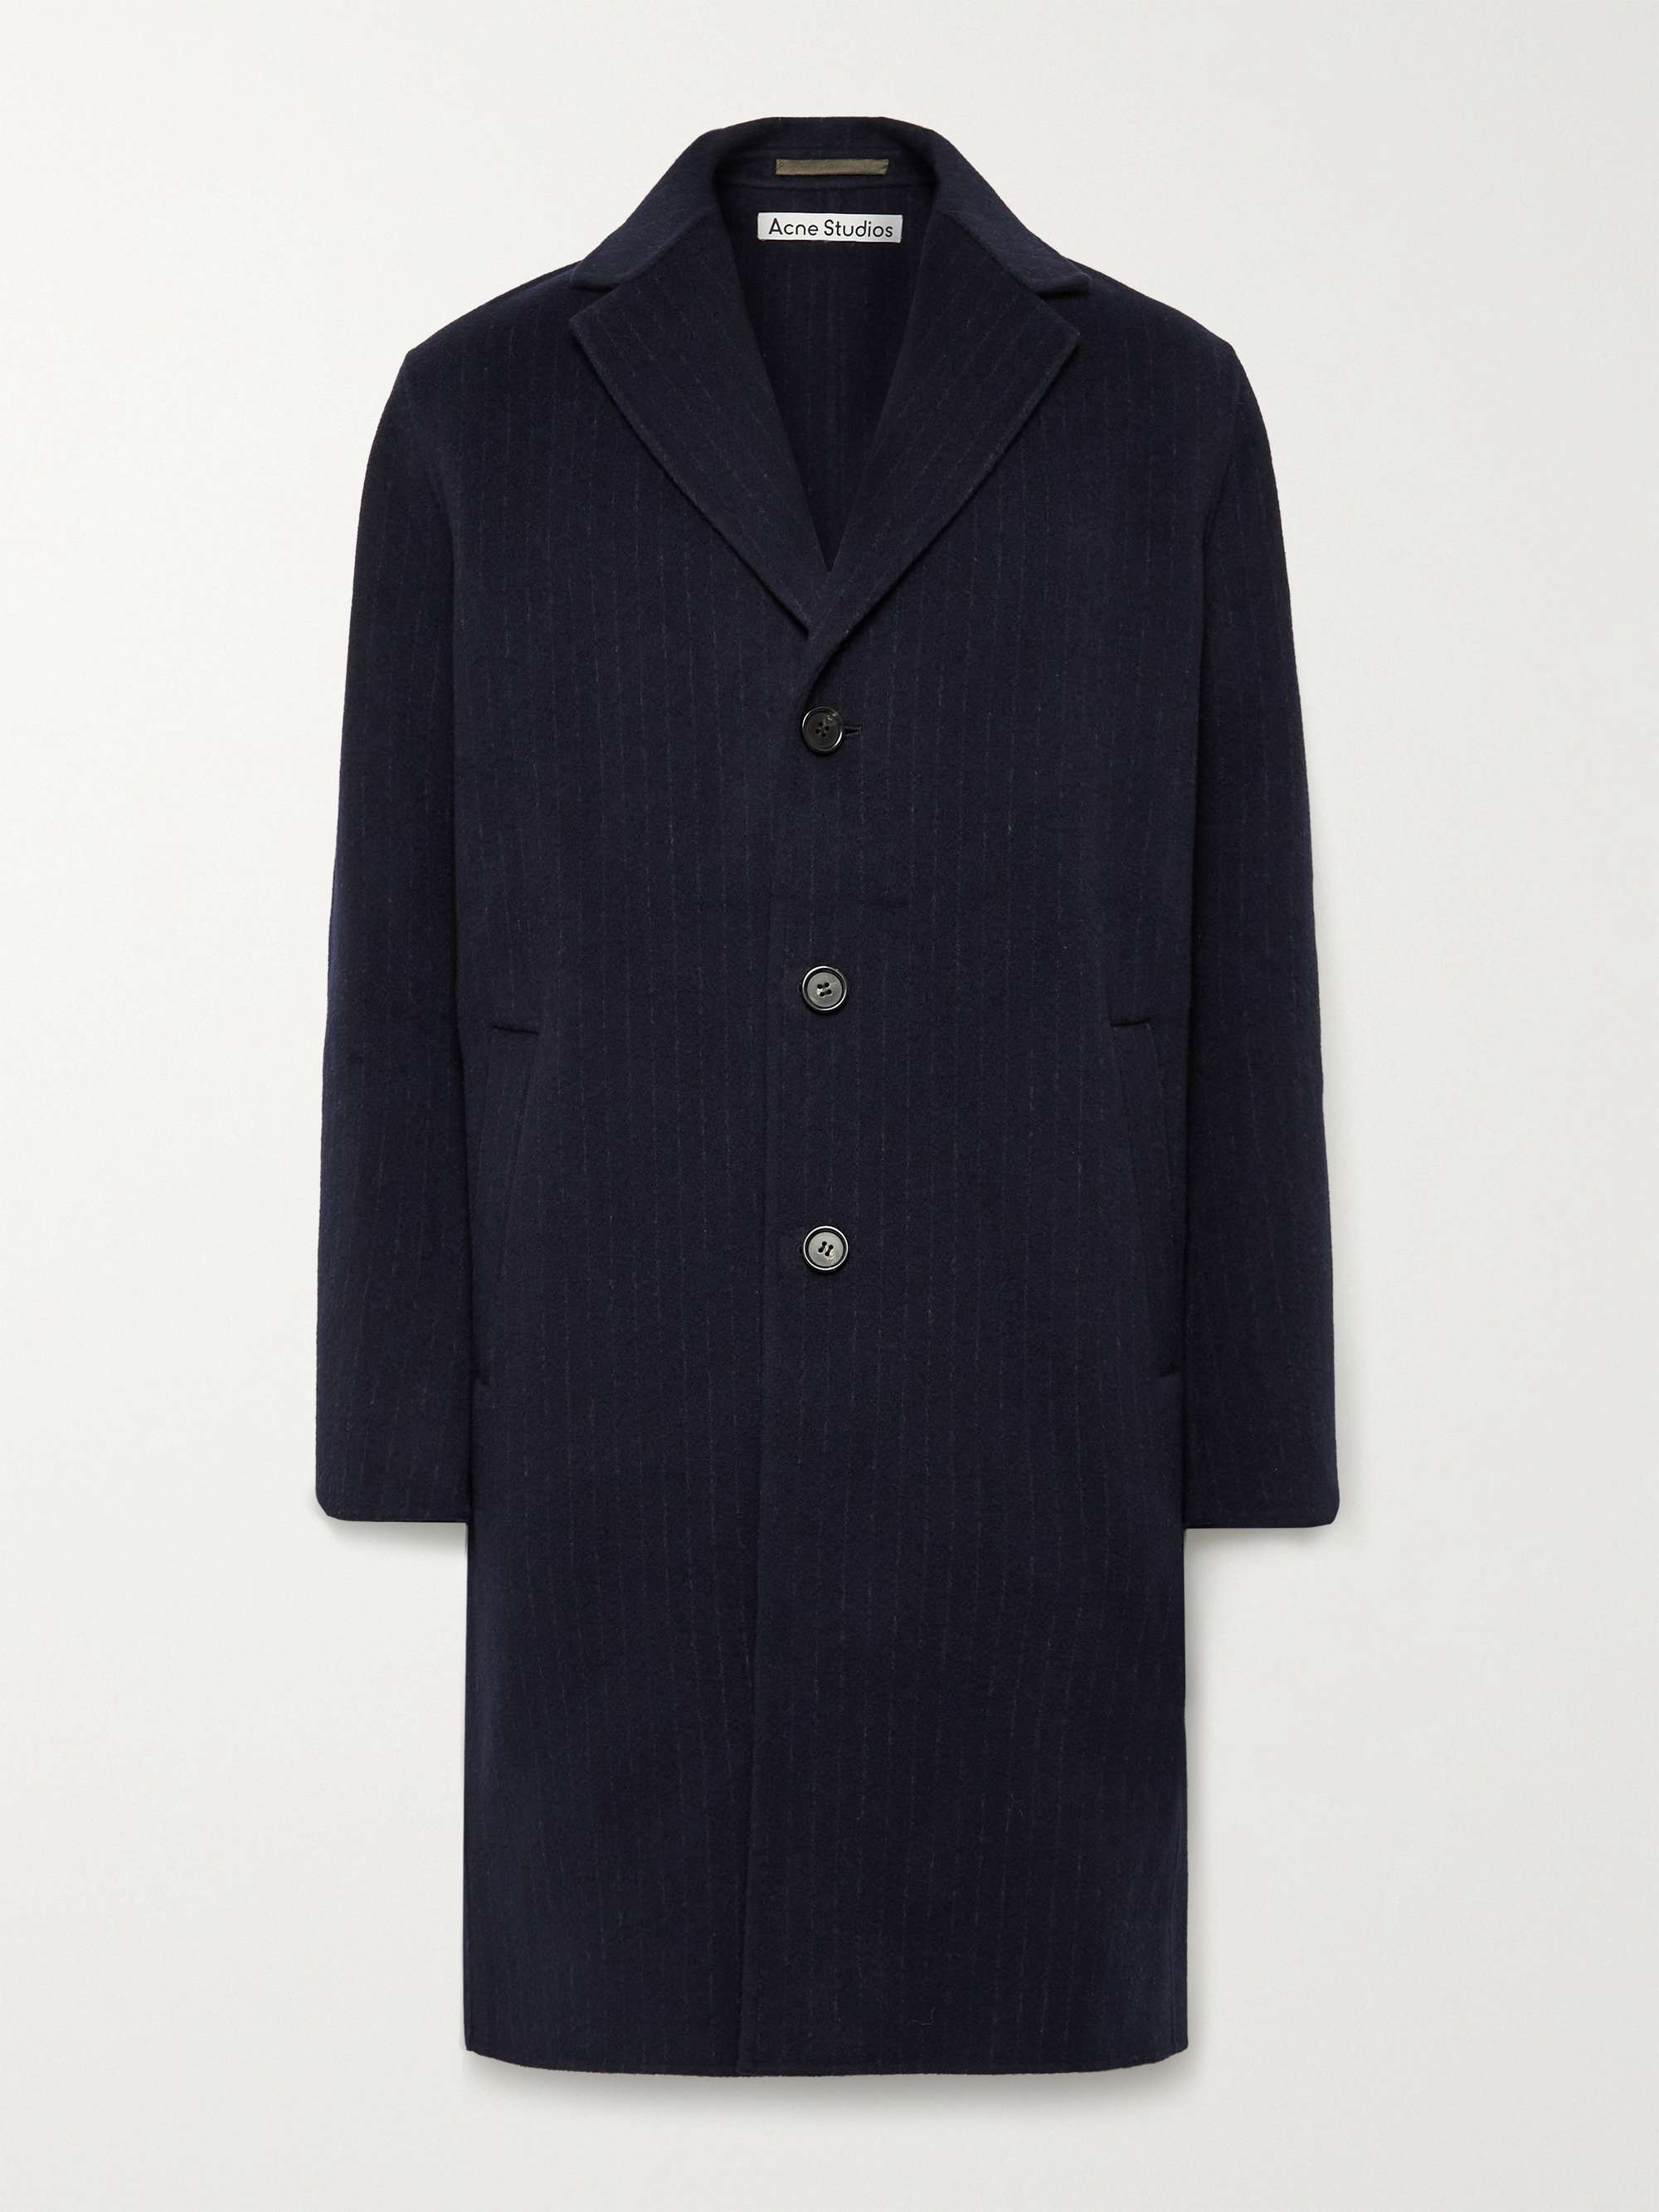 ACNE STUDIOS Pinstriped Double-Faced Wool Coat